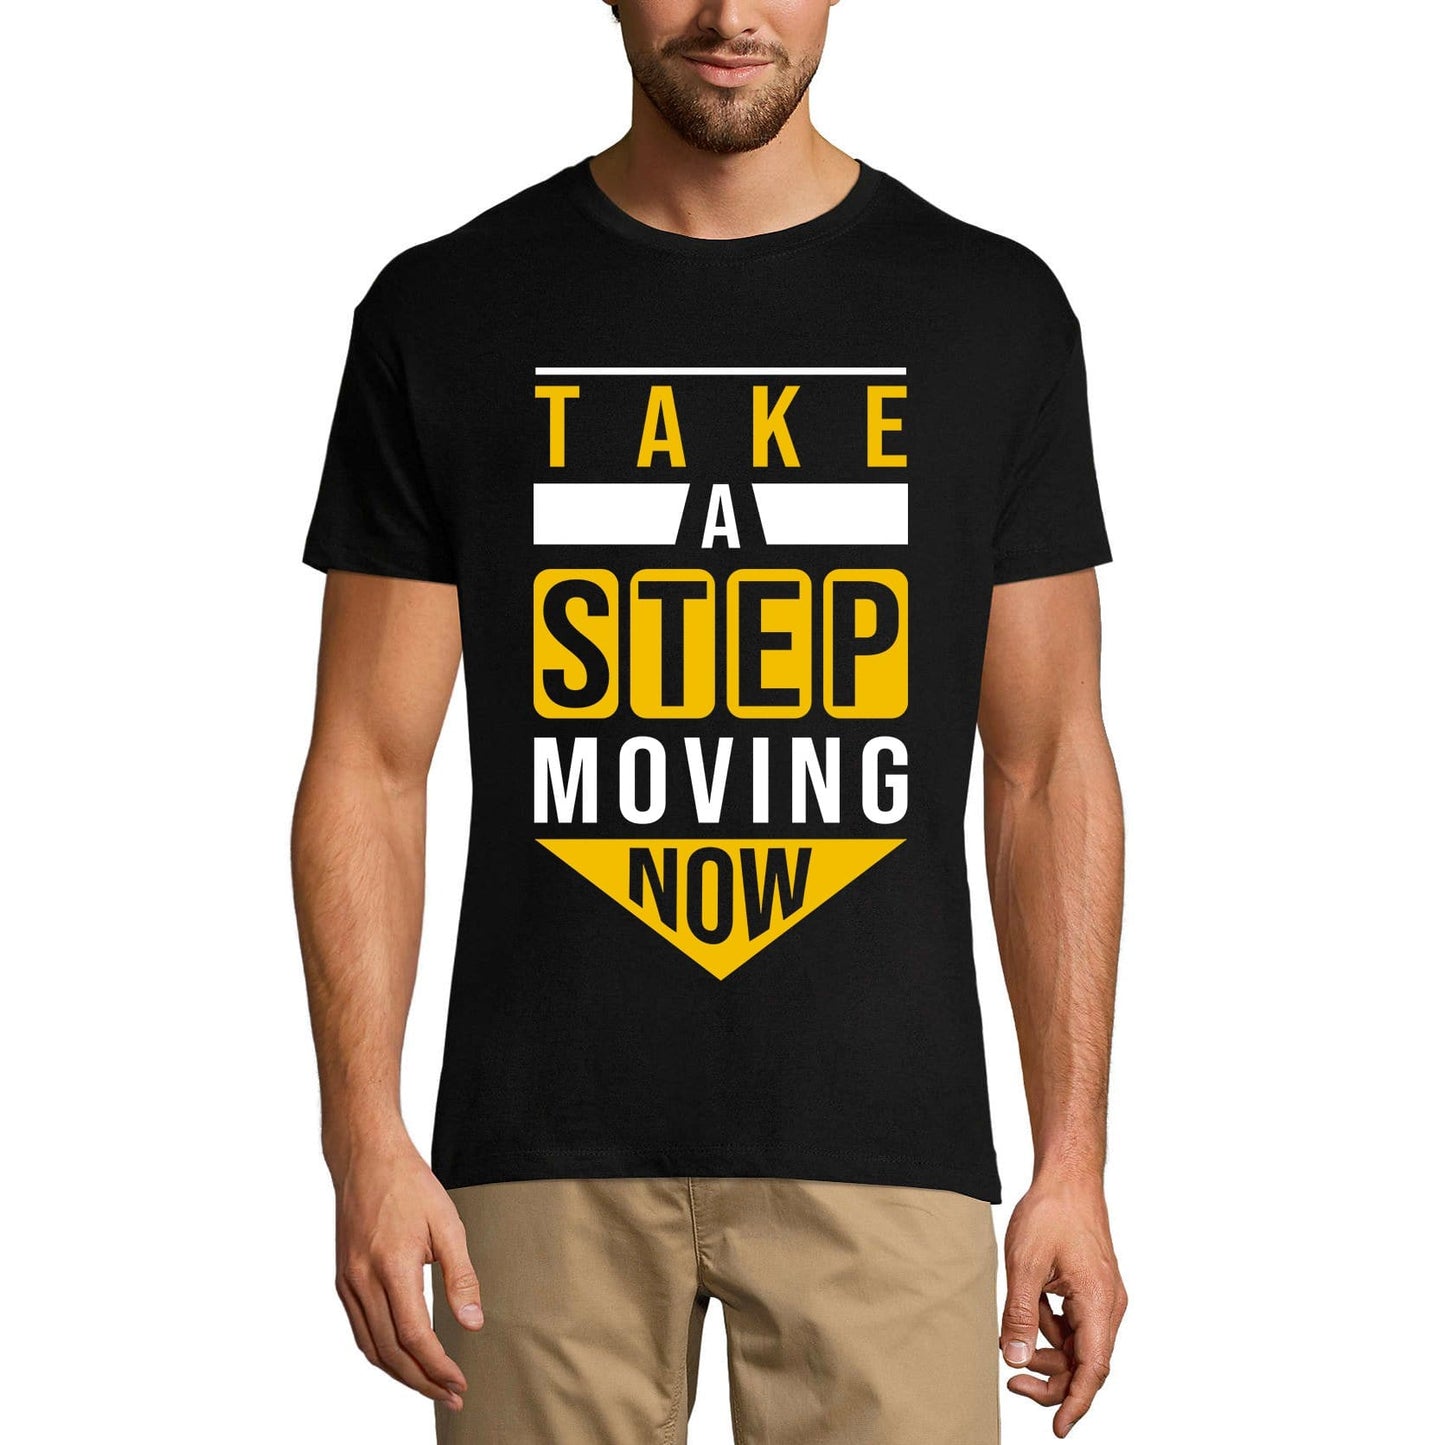 ULTRABASIC Graphic Men's T-Shirt Take a Step Moving Now - Funny Quote